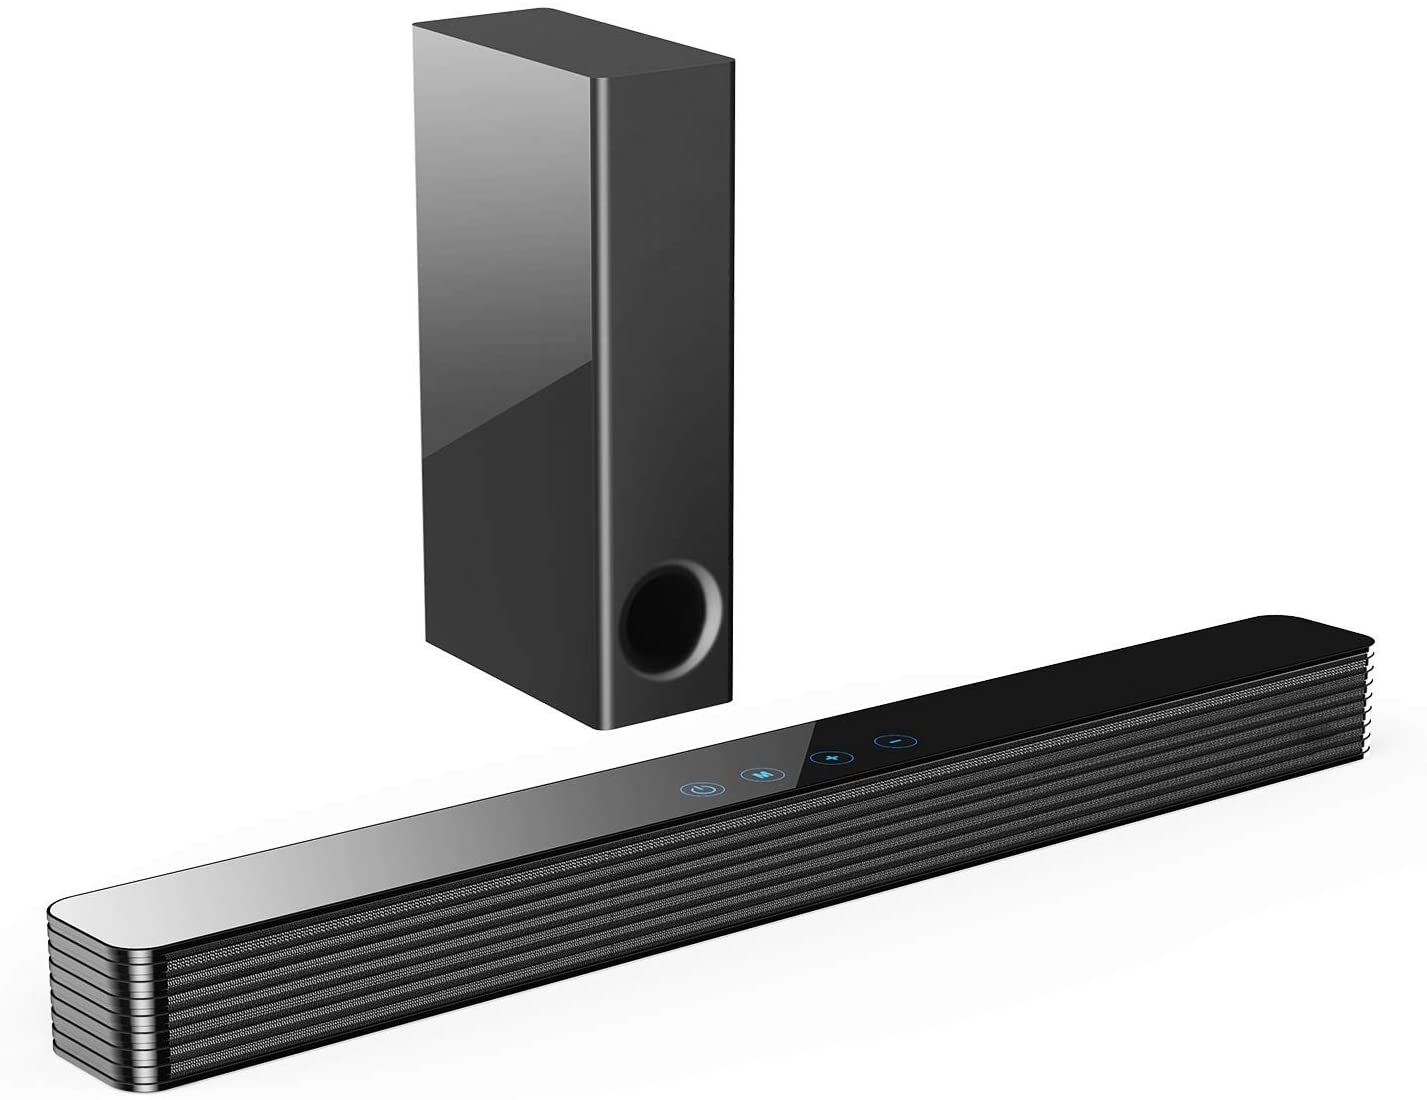 Norcent Black Mamba Series Sound Bar with Sub-woofer, | Xtrasaver